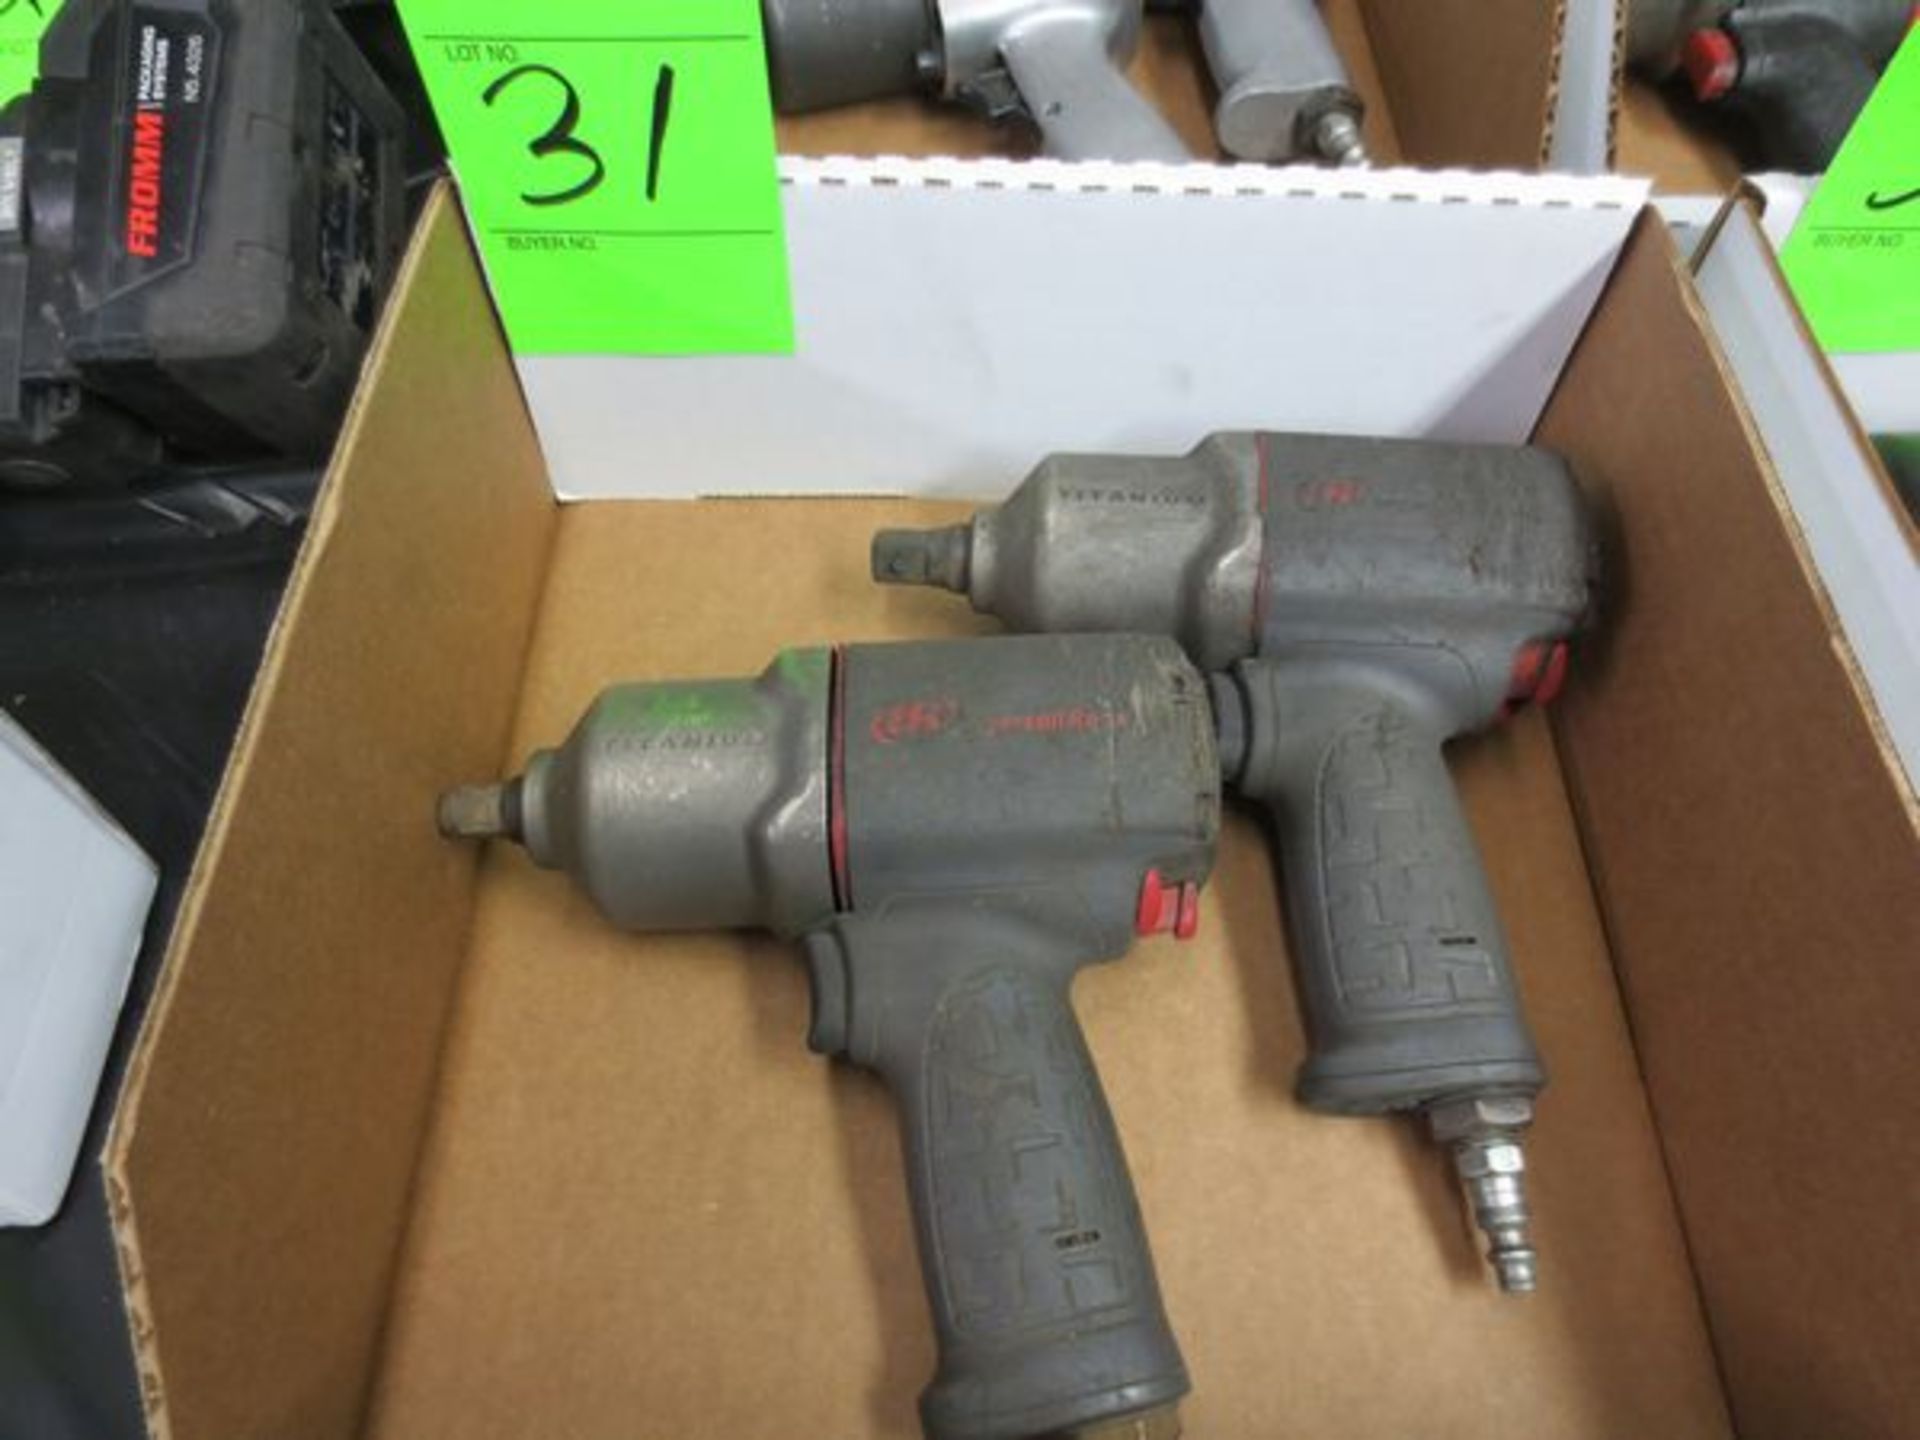 Two Ingersoll Rand pneumatic impact wrenches